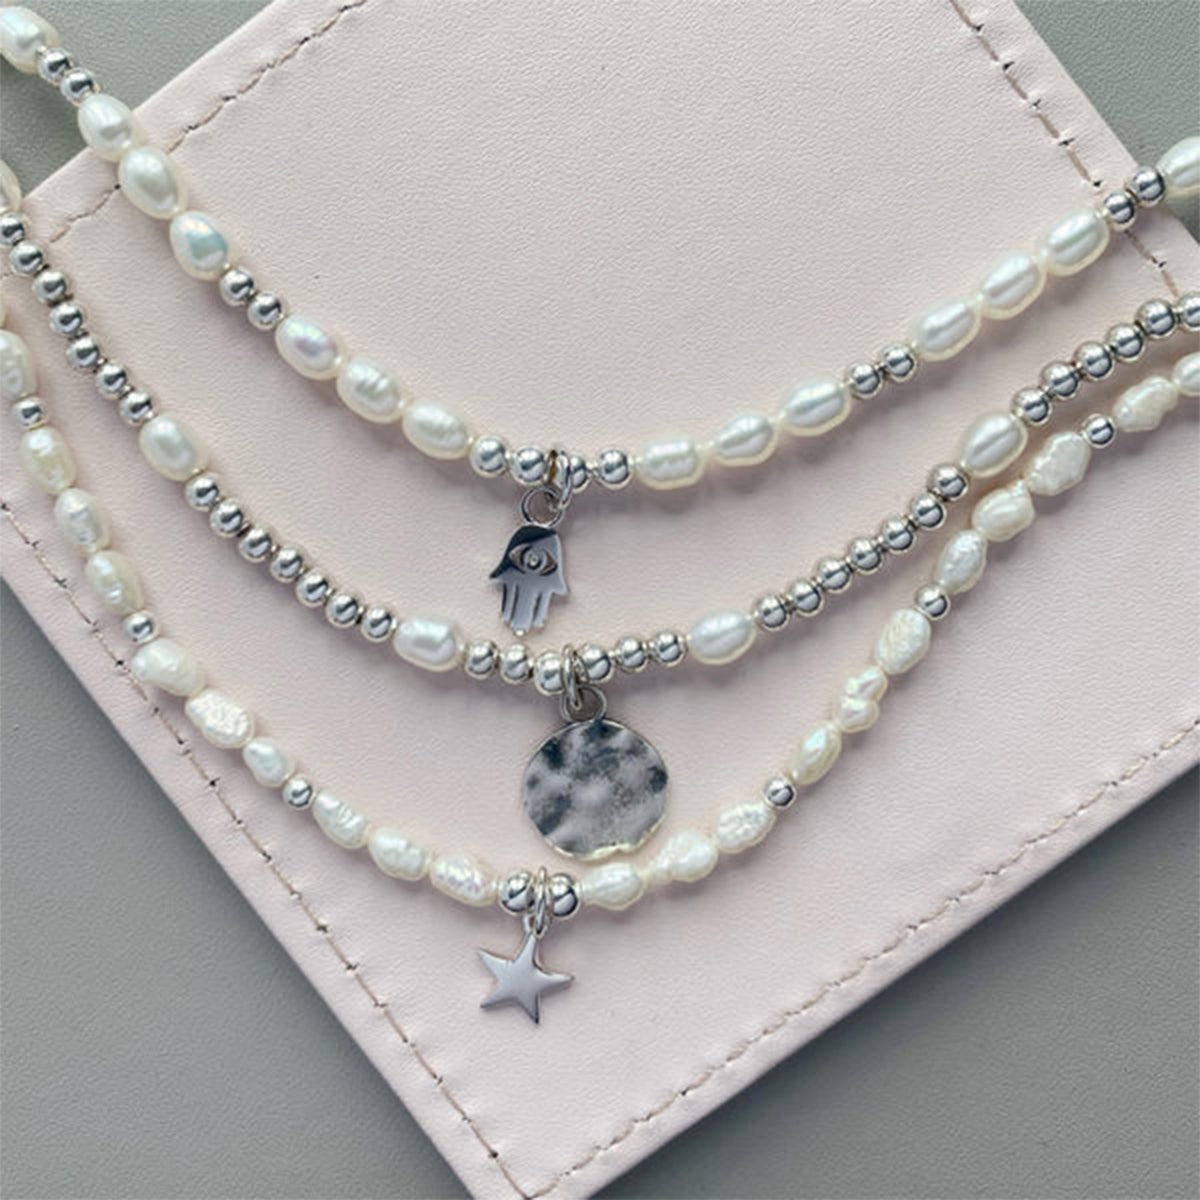 Steff Sterling Silver & Pearl Bead Anklet With Star Charm - Steffans Jewellers